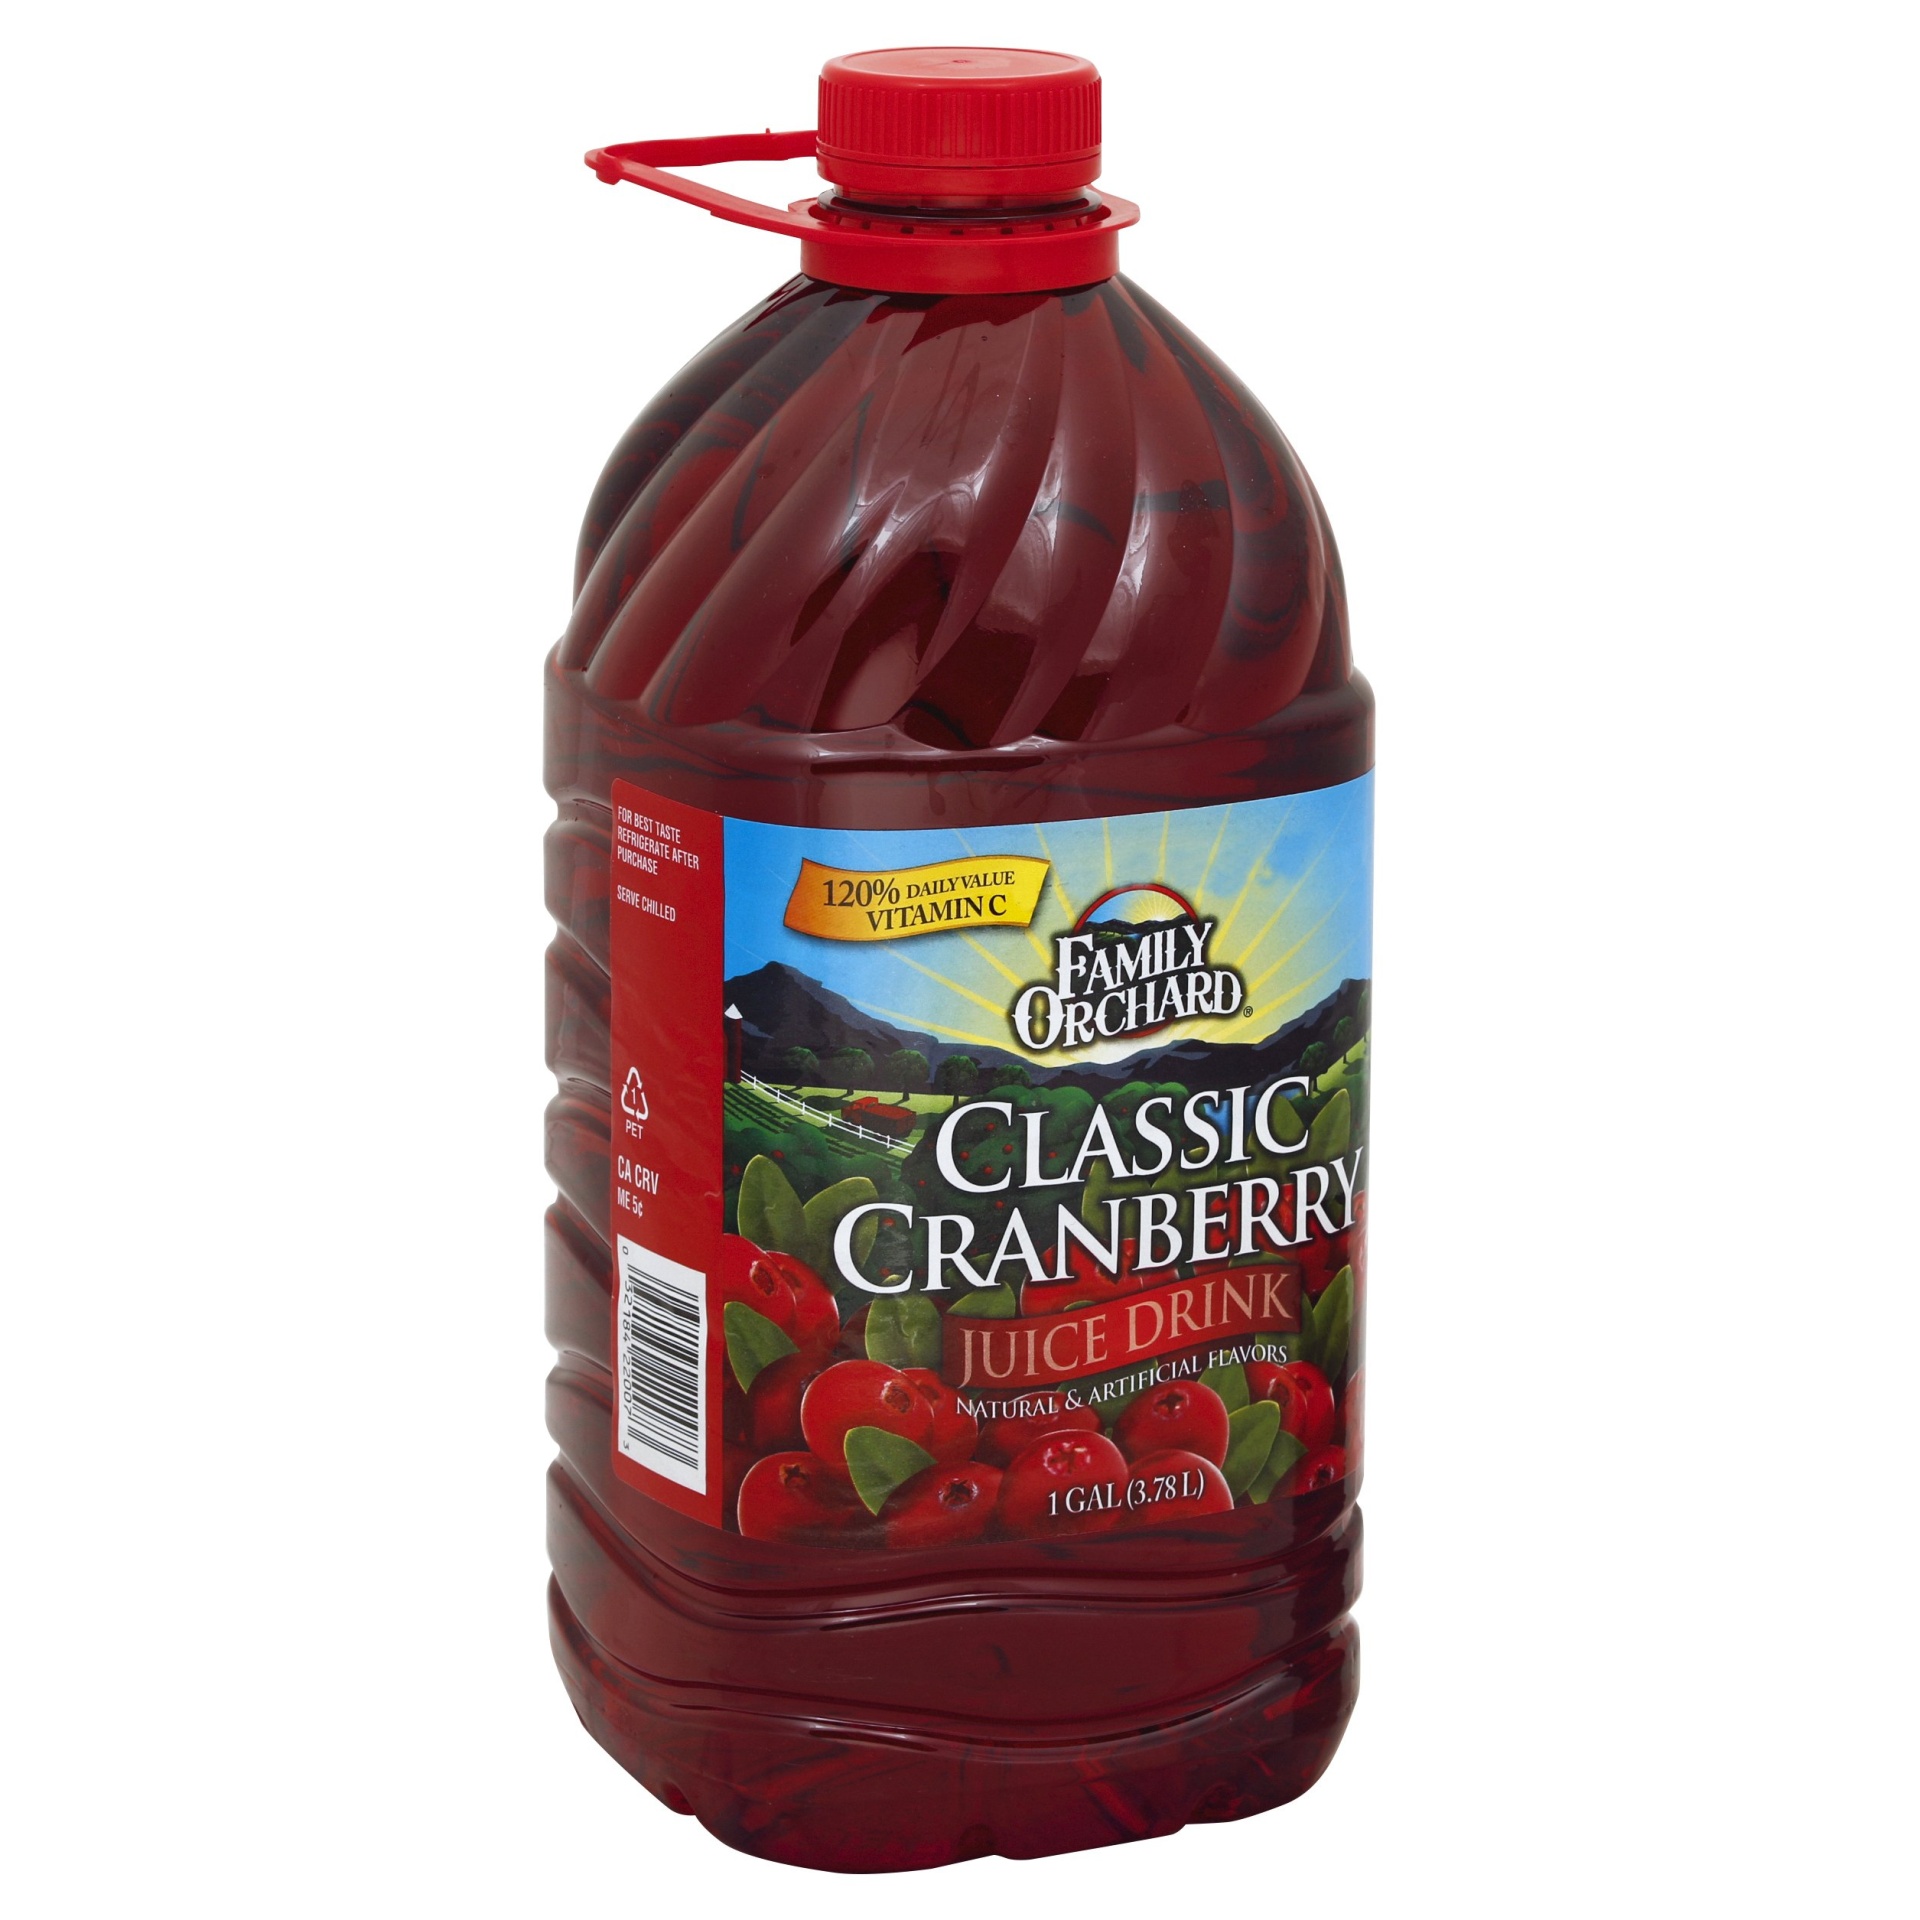 slide 1 of 1, Family Orchard Classic Cranberry Juice Drink, 1 gal